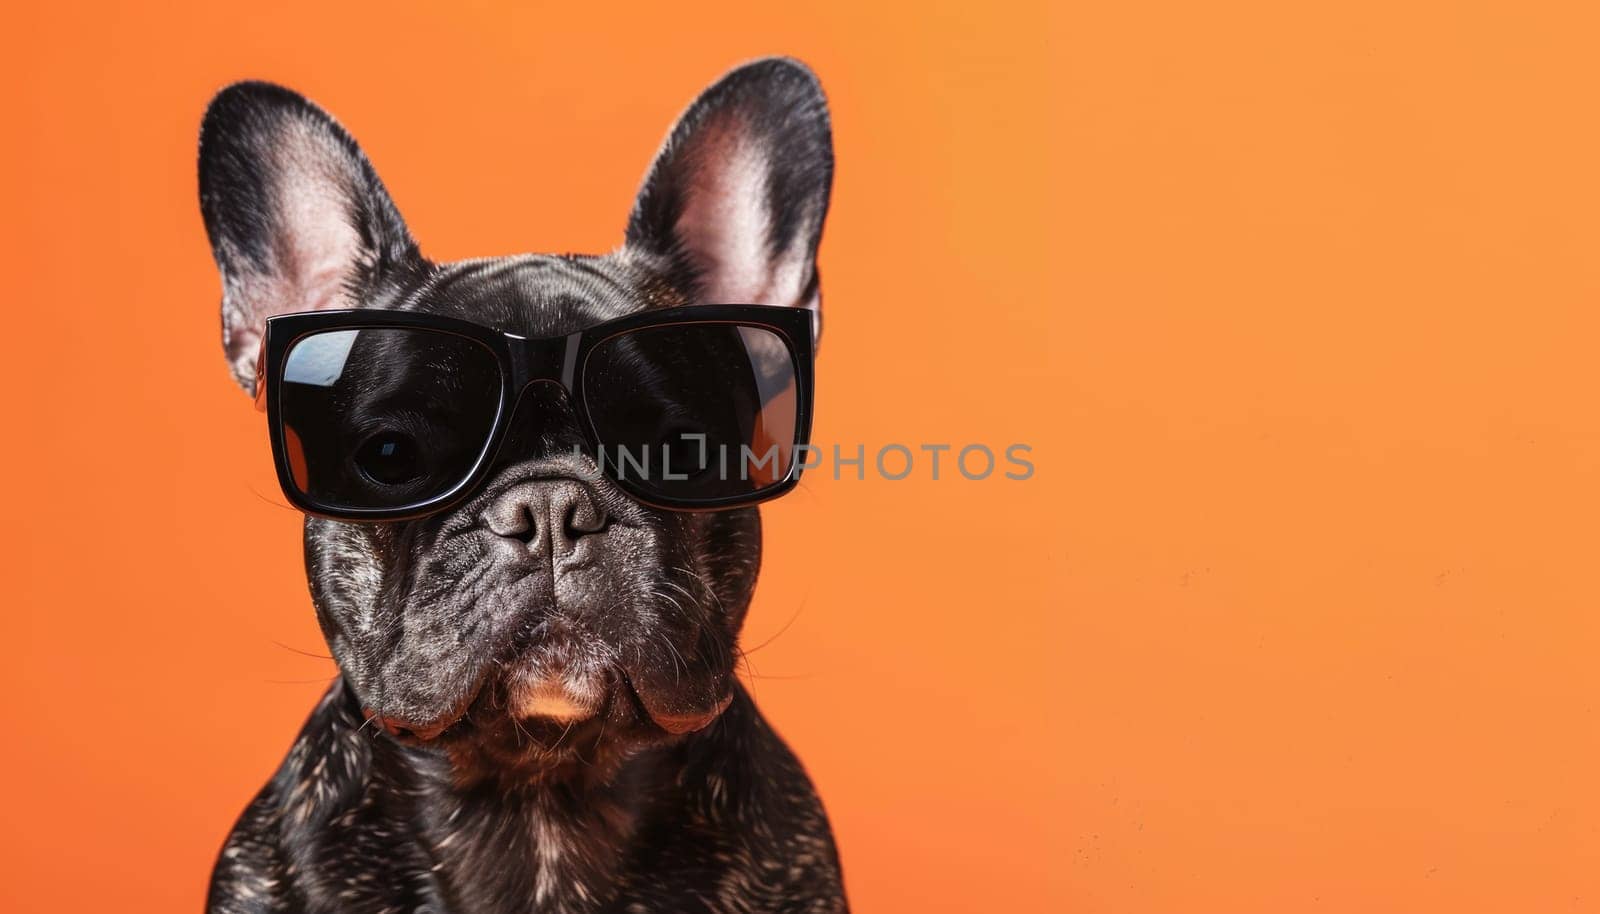 A dog wearing sunglasses and standing in front of an orange background. The dog appears to be posing for a photo, and the sunglasses give it a cool and stylish look